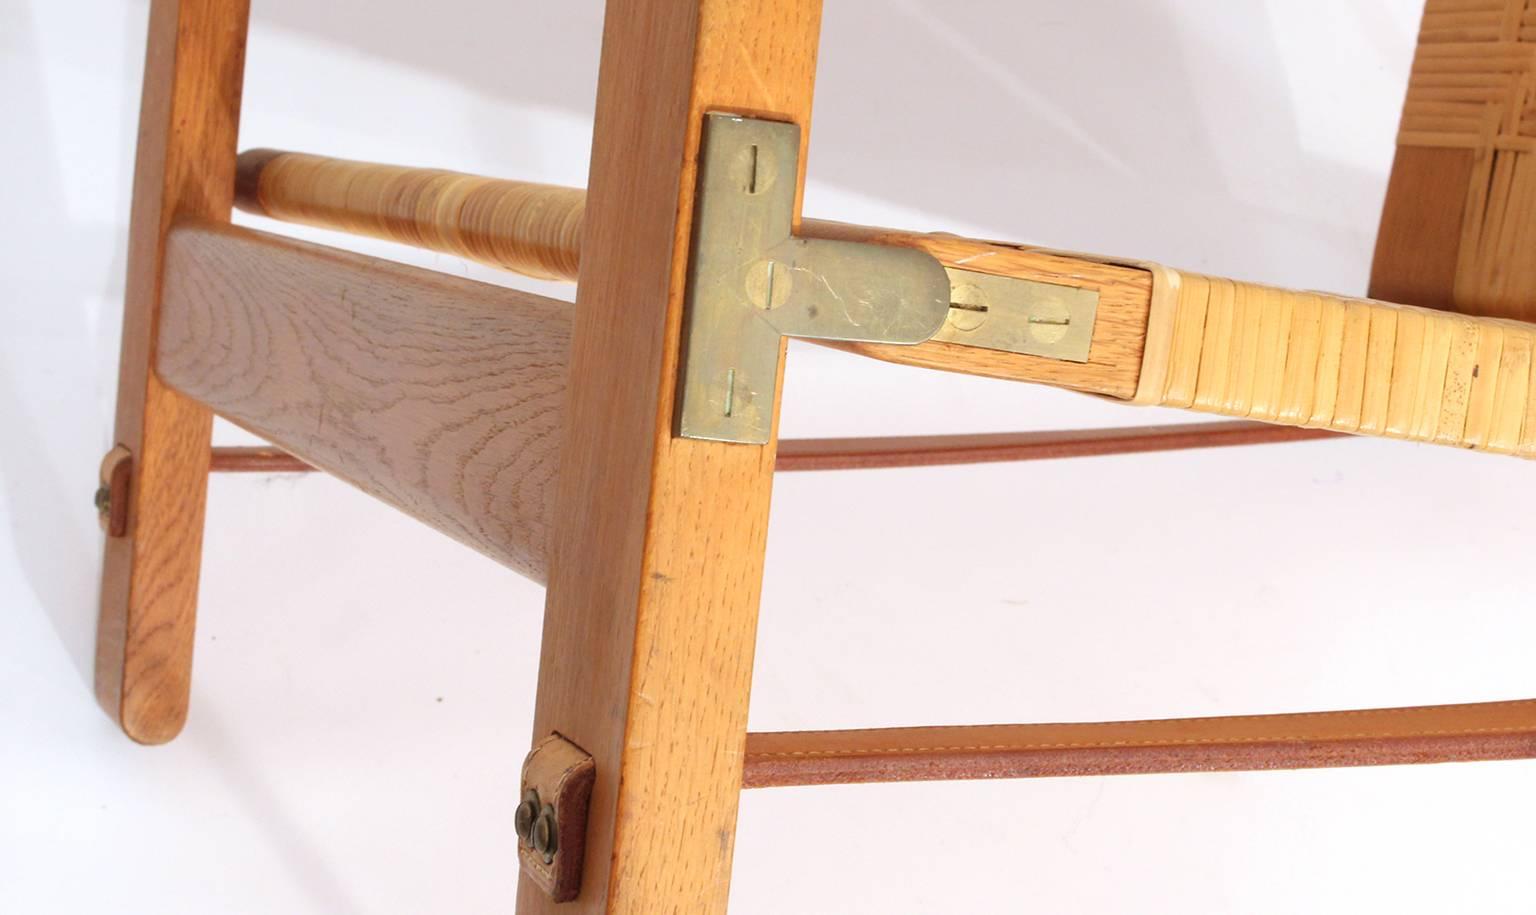 Woven Extremely Rare Børge Mogensen Hunting Chair by Cabinetmaker Erhard Rasmussen For Sale